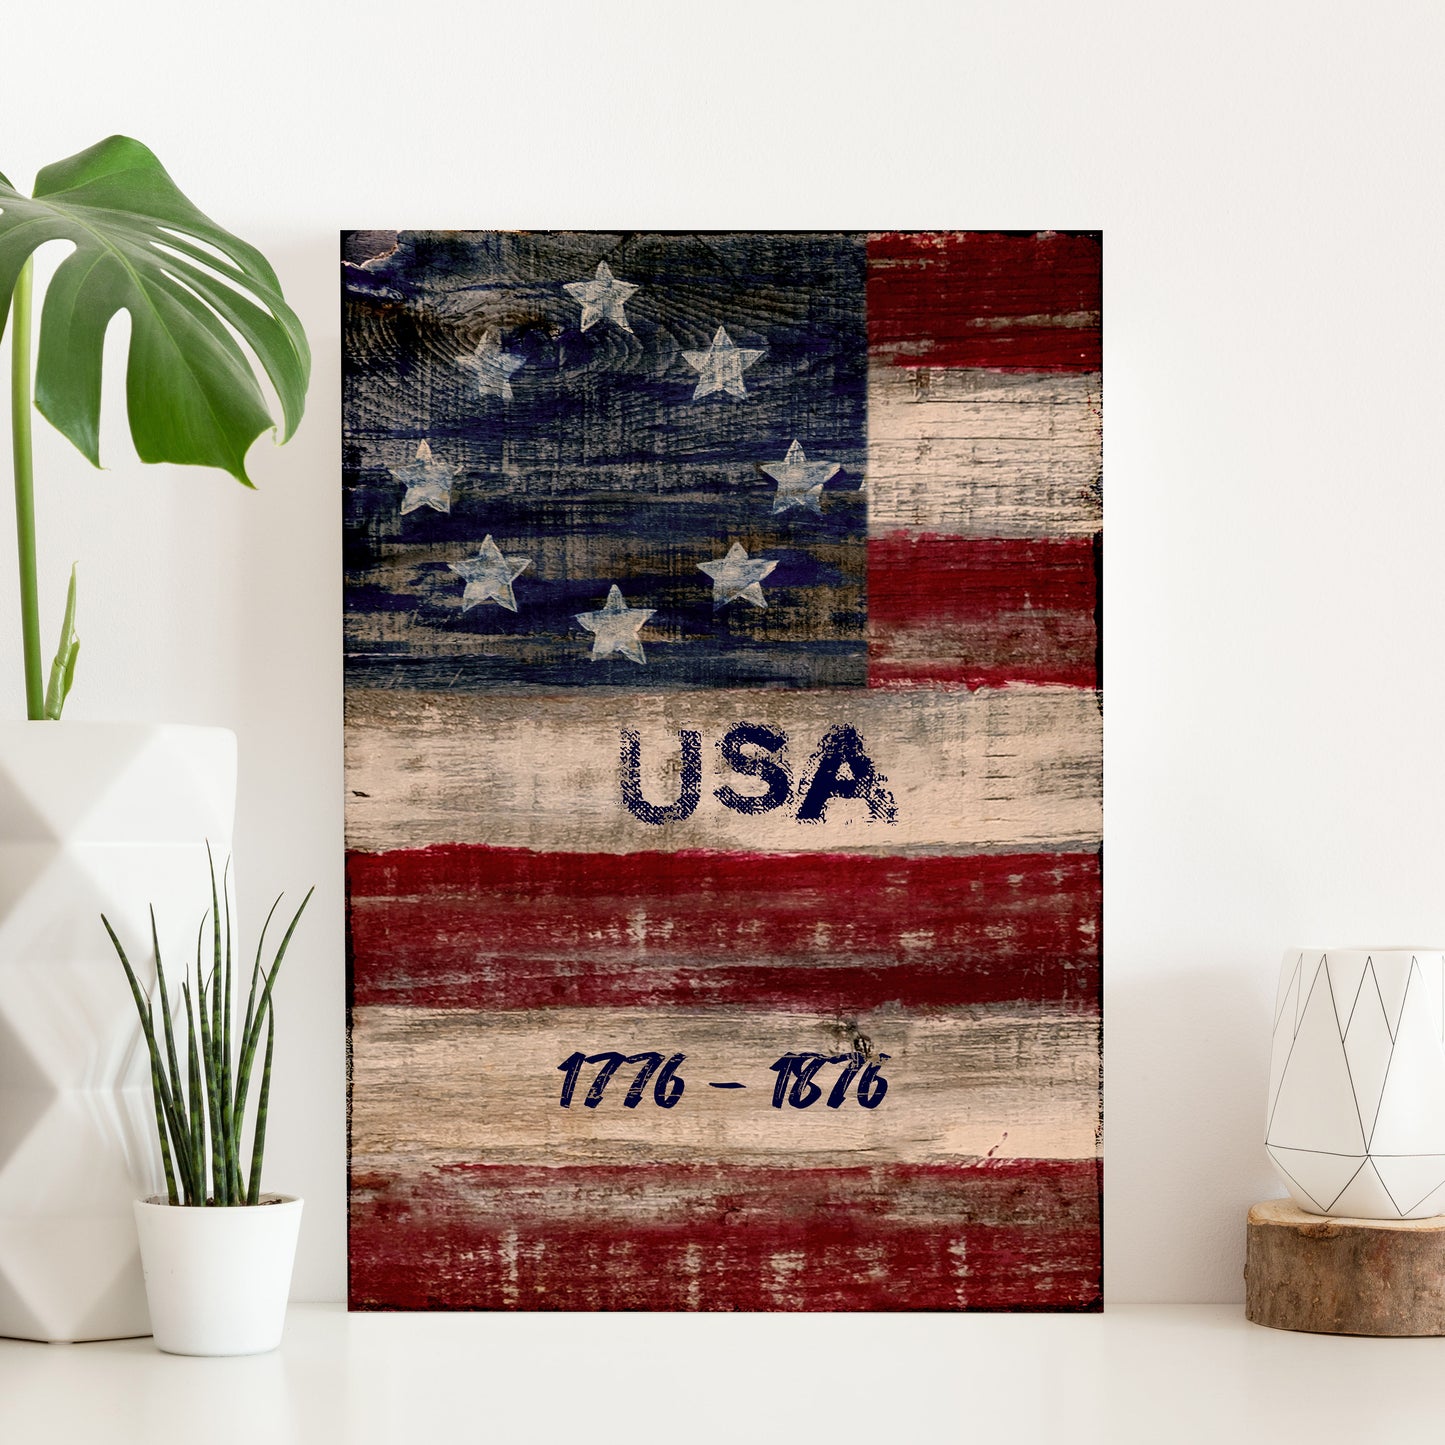 USA 1776-1876 Sign - Image by Tailored Canvases